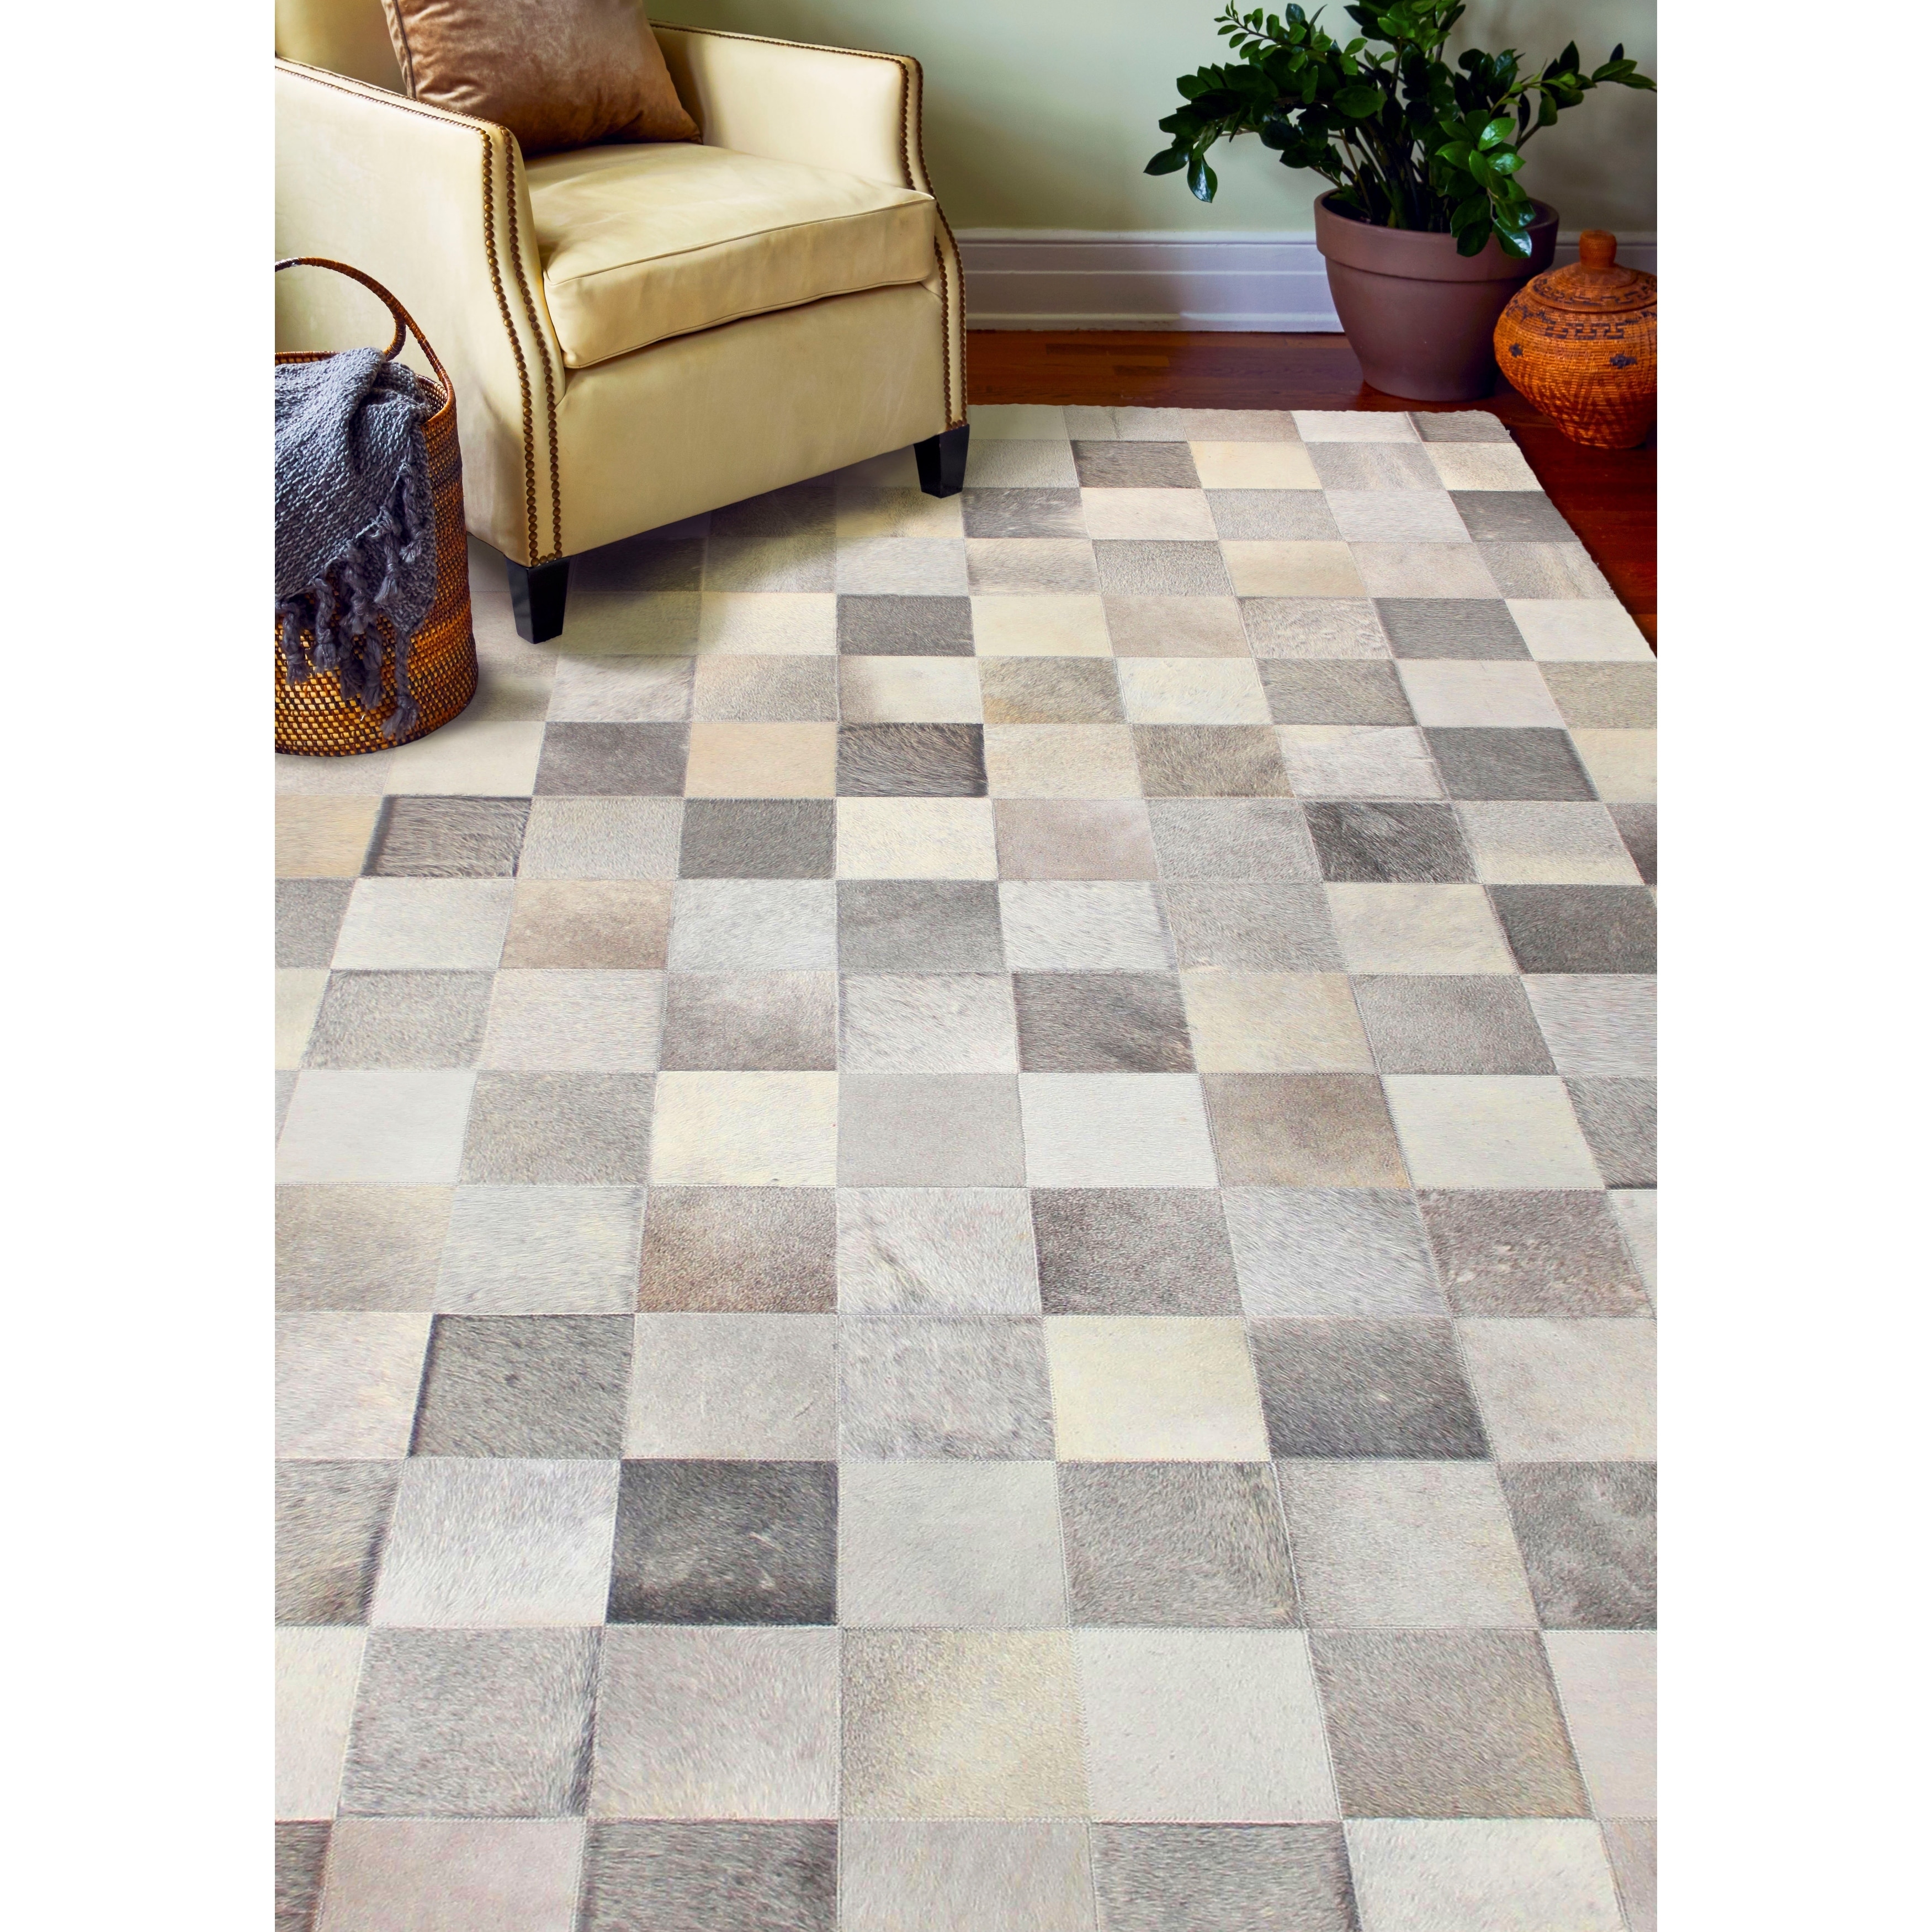 Griffin Cowhide Area Rug 8 X 10 For Sale Online